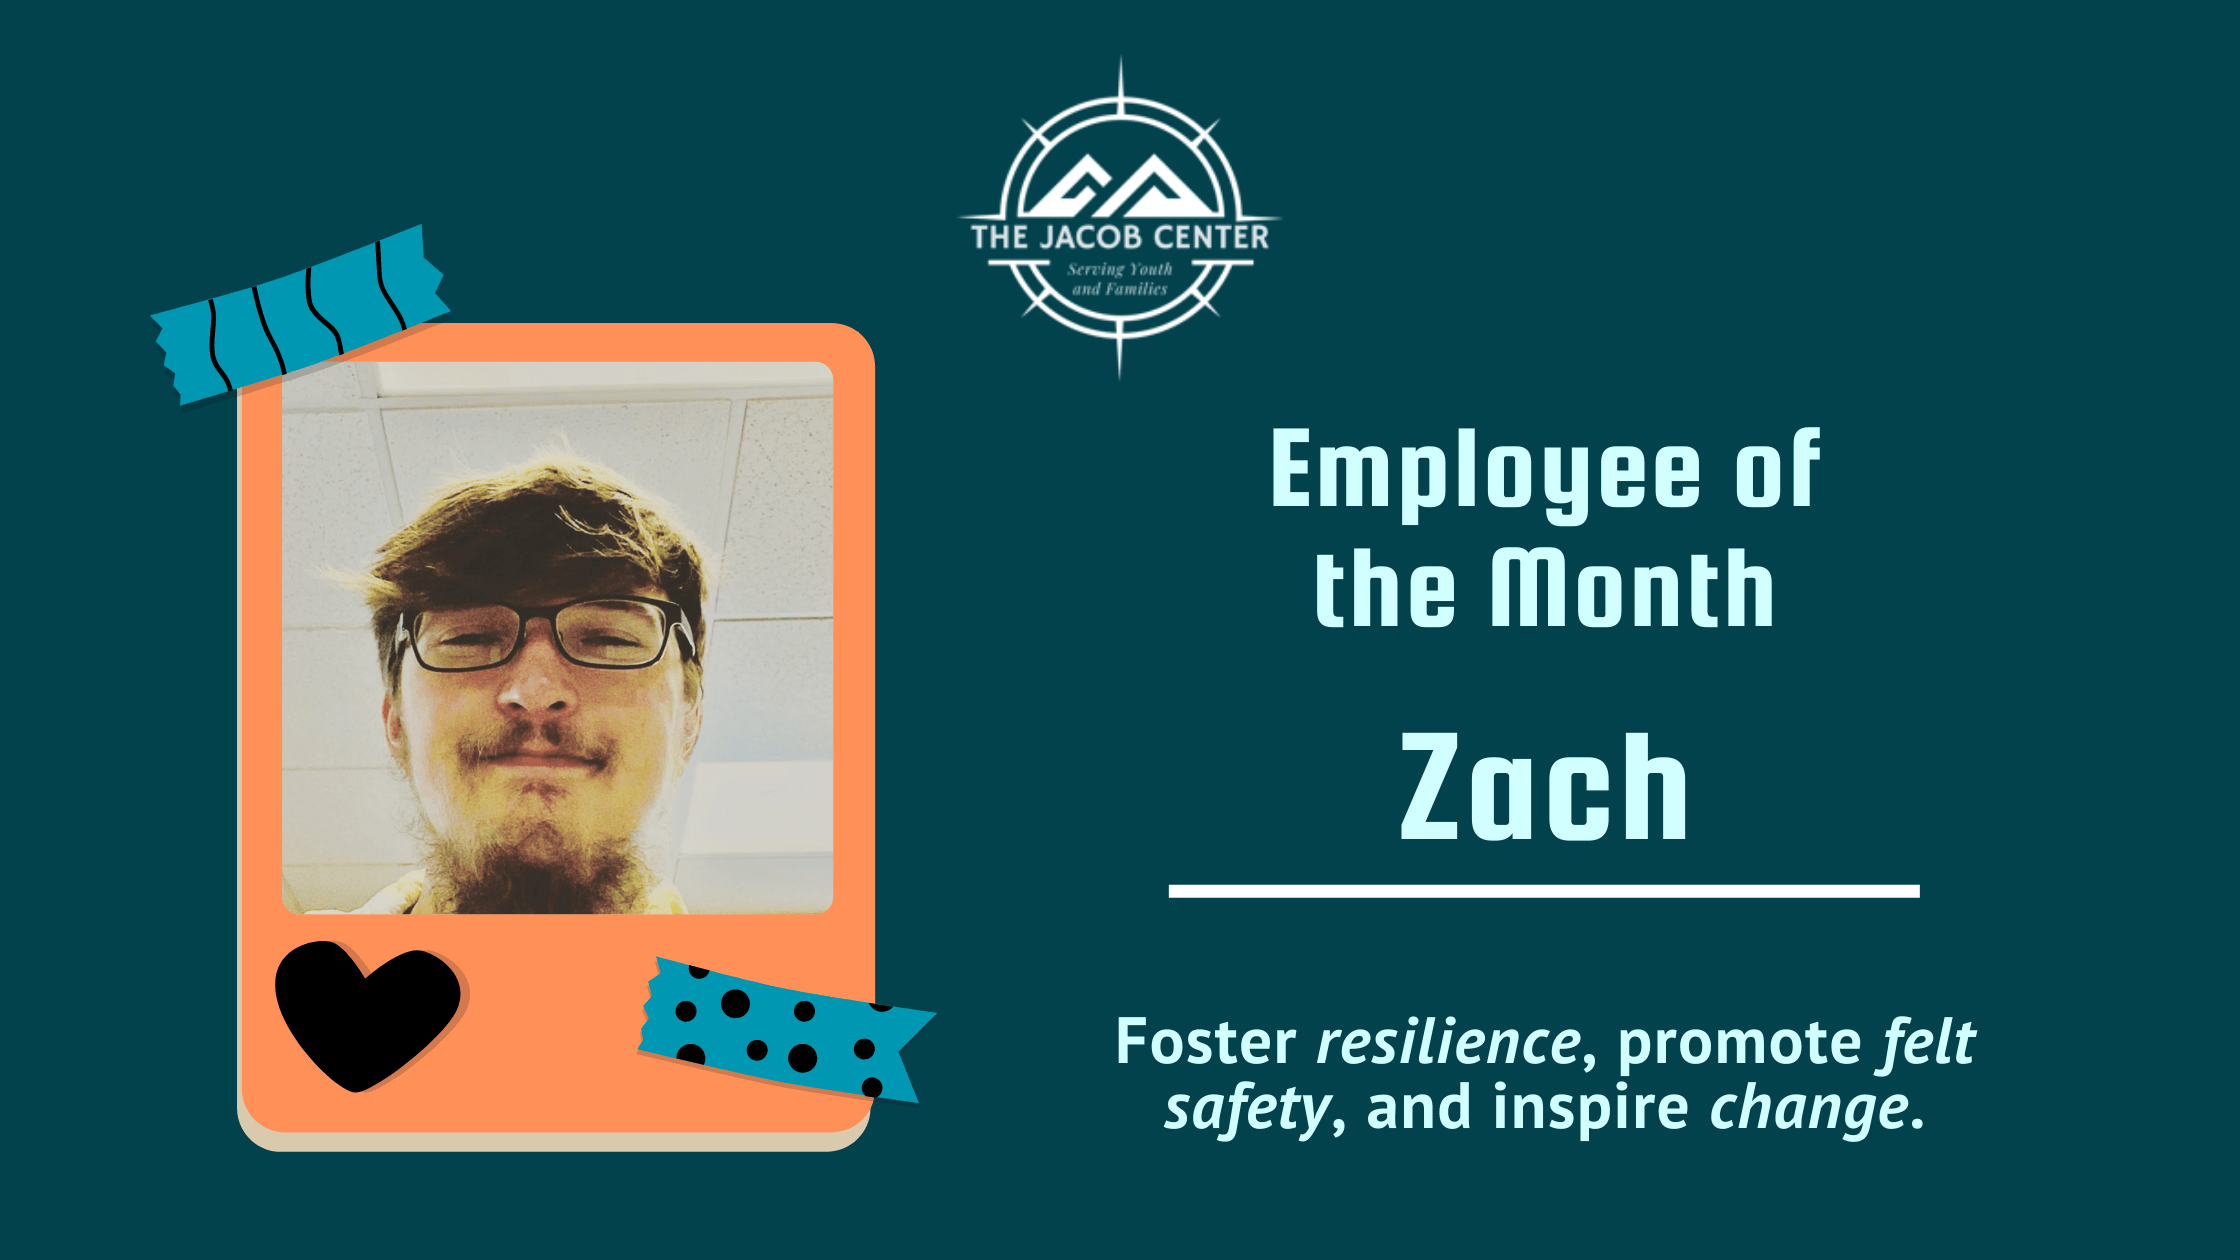 A picture of Jach, who works at the Jacob Center, and was recognized as employee of the month.